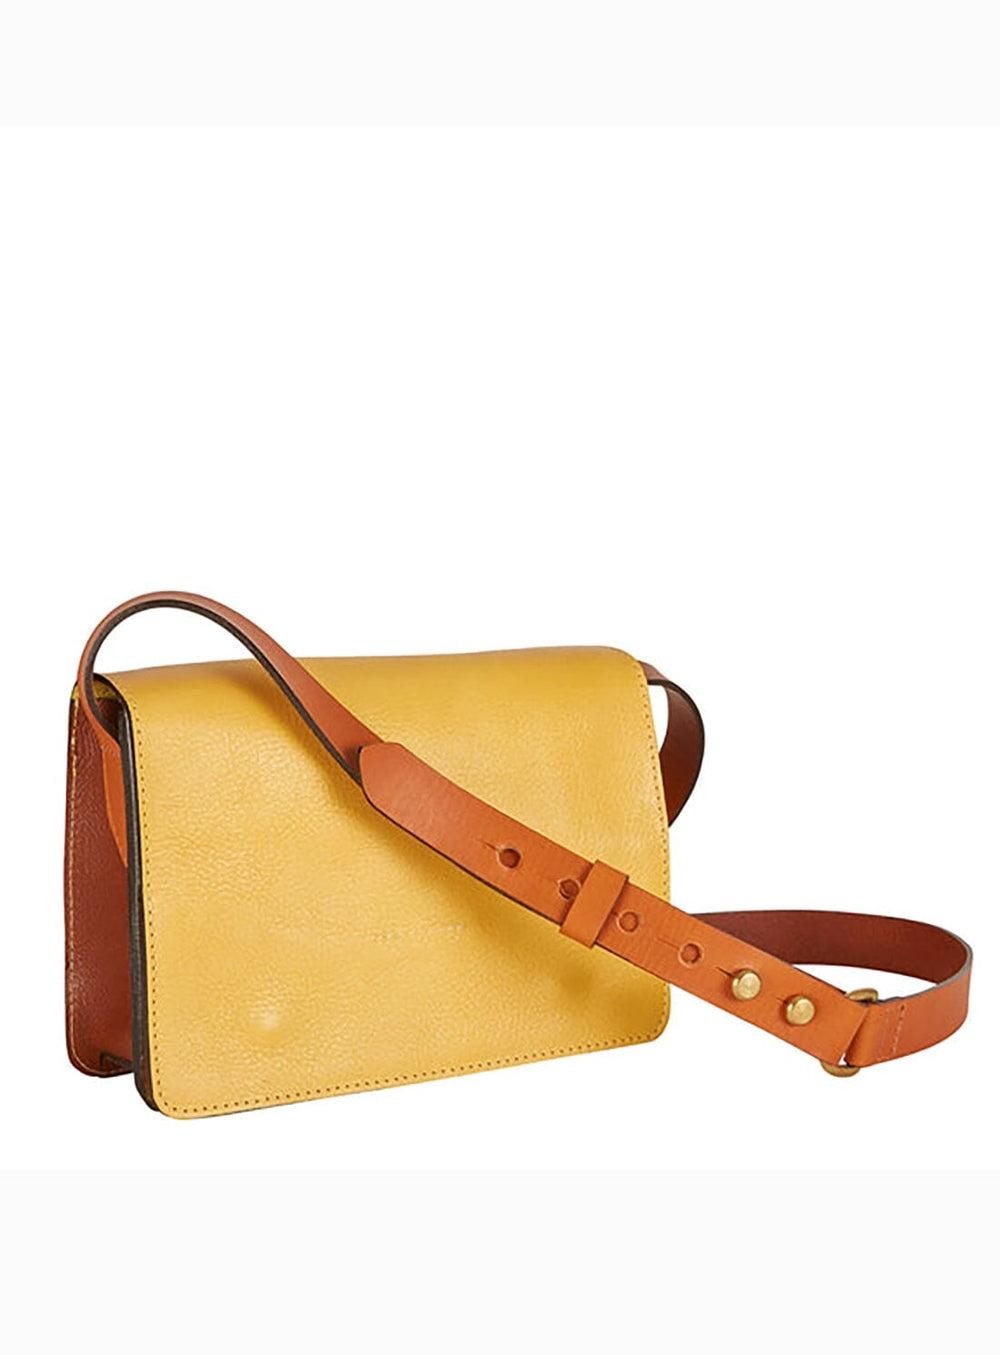 The Rye Leather Satchel in Yellow and Conker Bags YBDFinds 